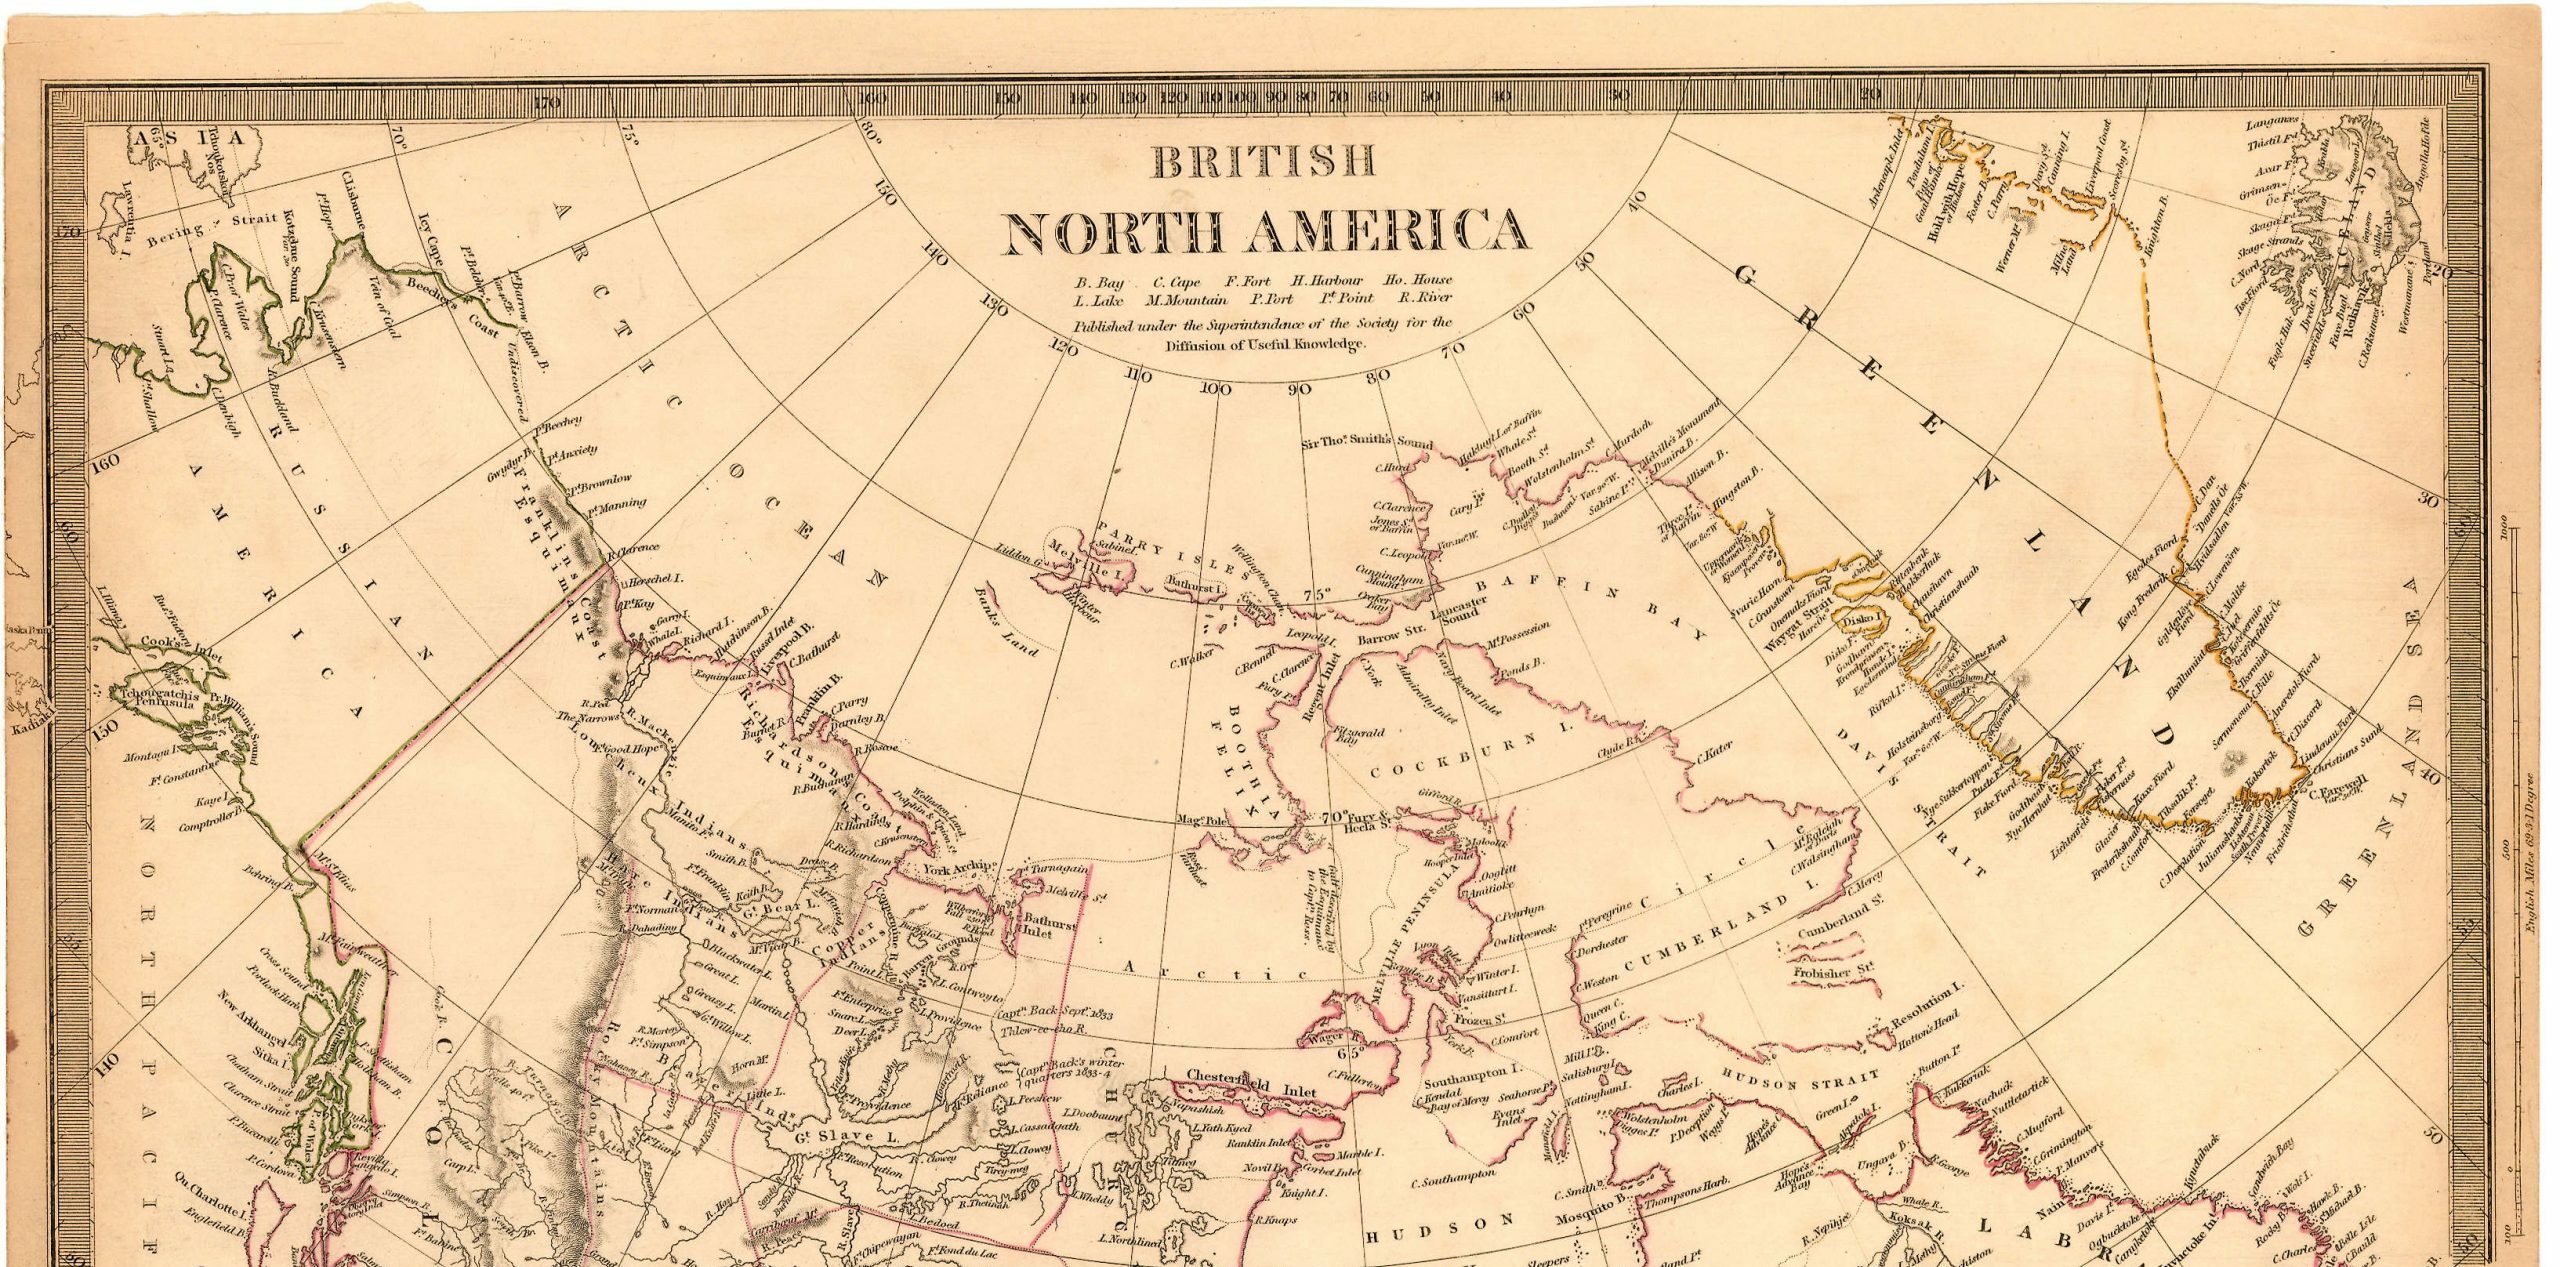 Map of British North America, 1834. Photo courtesy of the City of Vancouver Archives